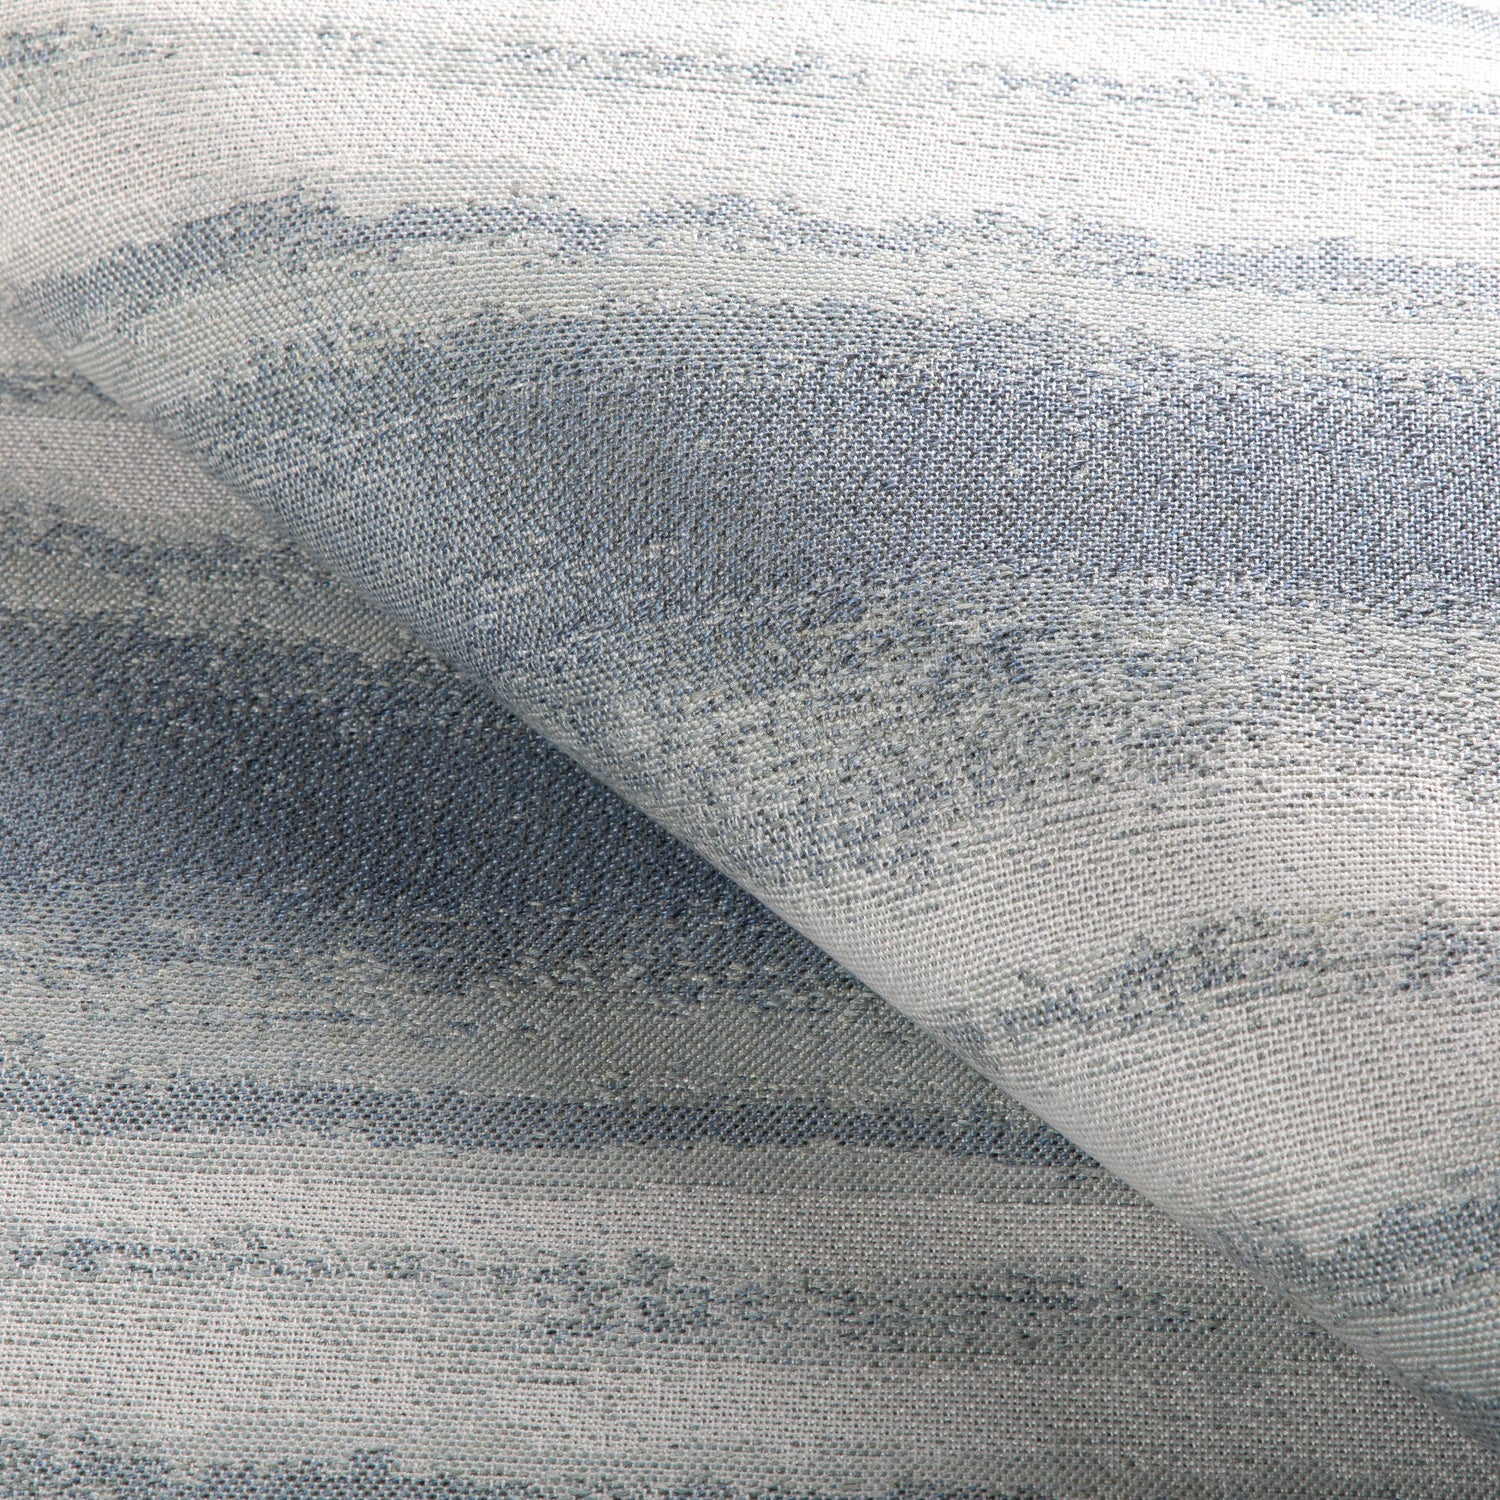 Fabric sample of Riverwalk fabric in ocean color - pattern 36932.15.0 - by Kravet Couture in the Riviera collection